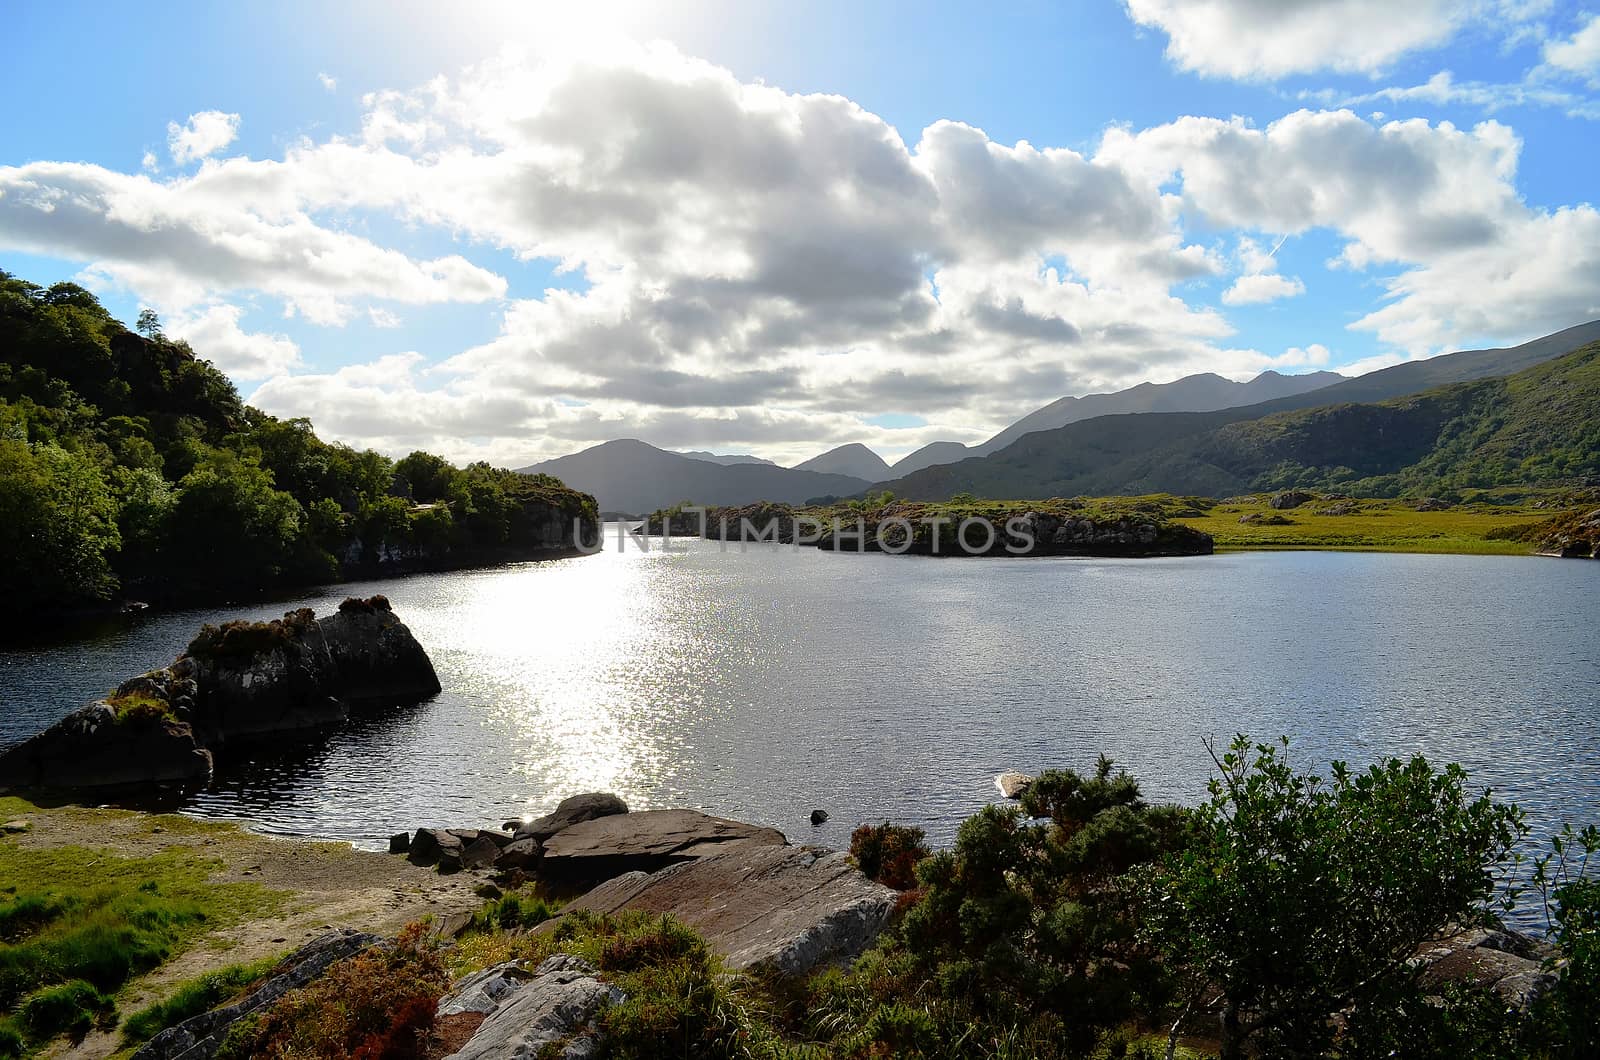 The Lakes of Killarney are a renowned scenic attraction located near Killarney, County Kerry, in Ireland.